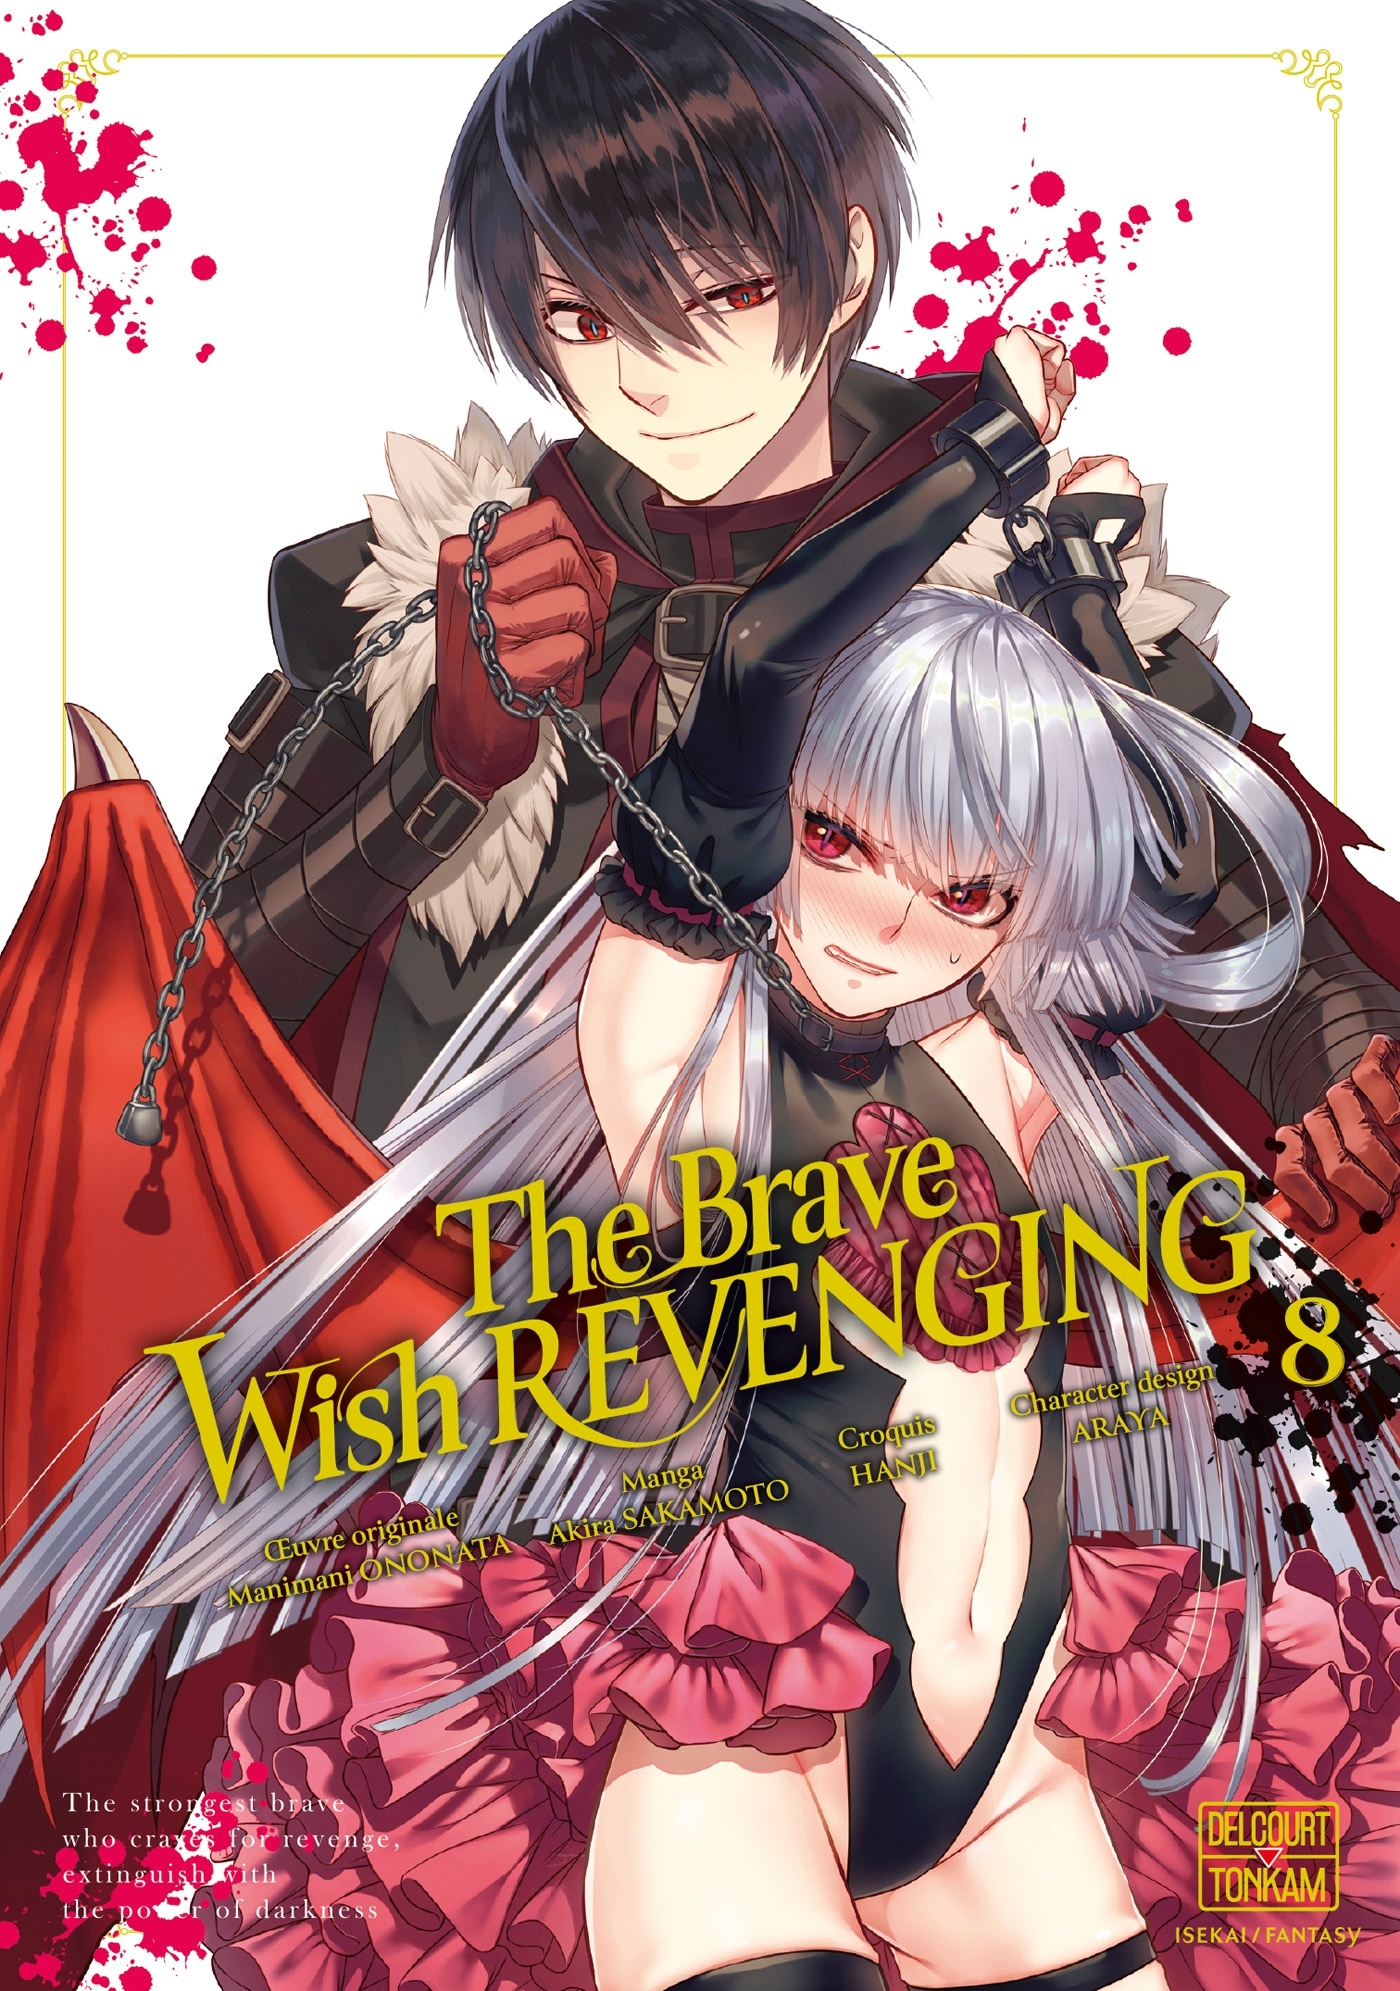 The Brave wish revenging T08 (9782413079873-front-cover)